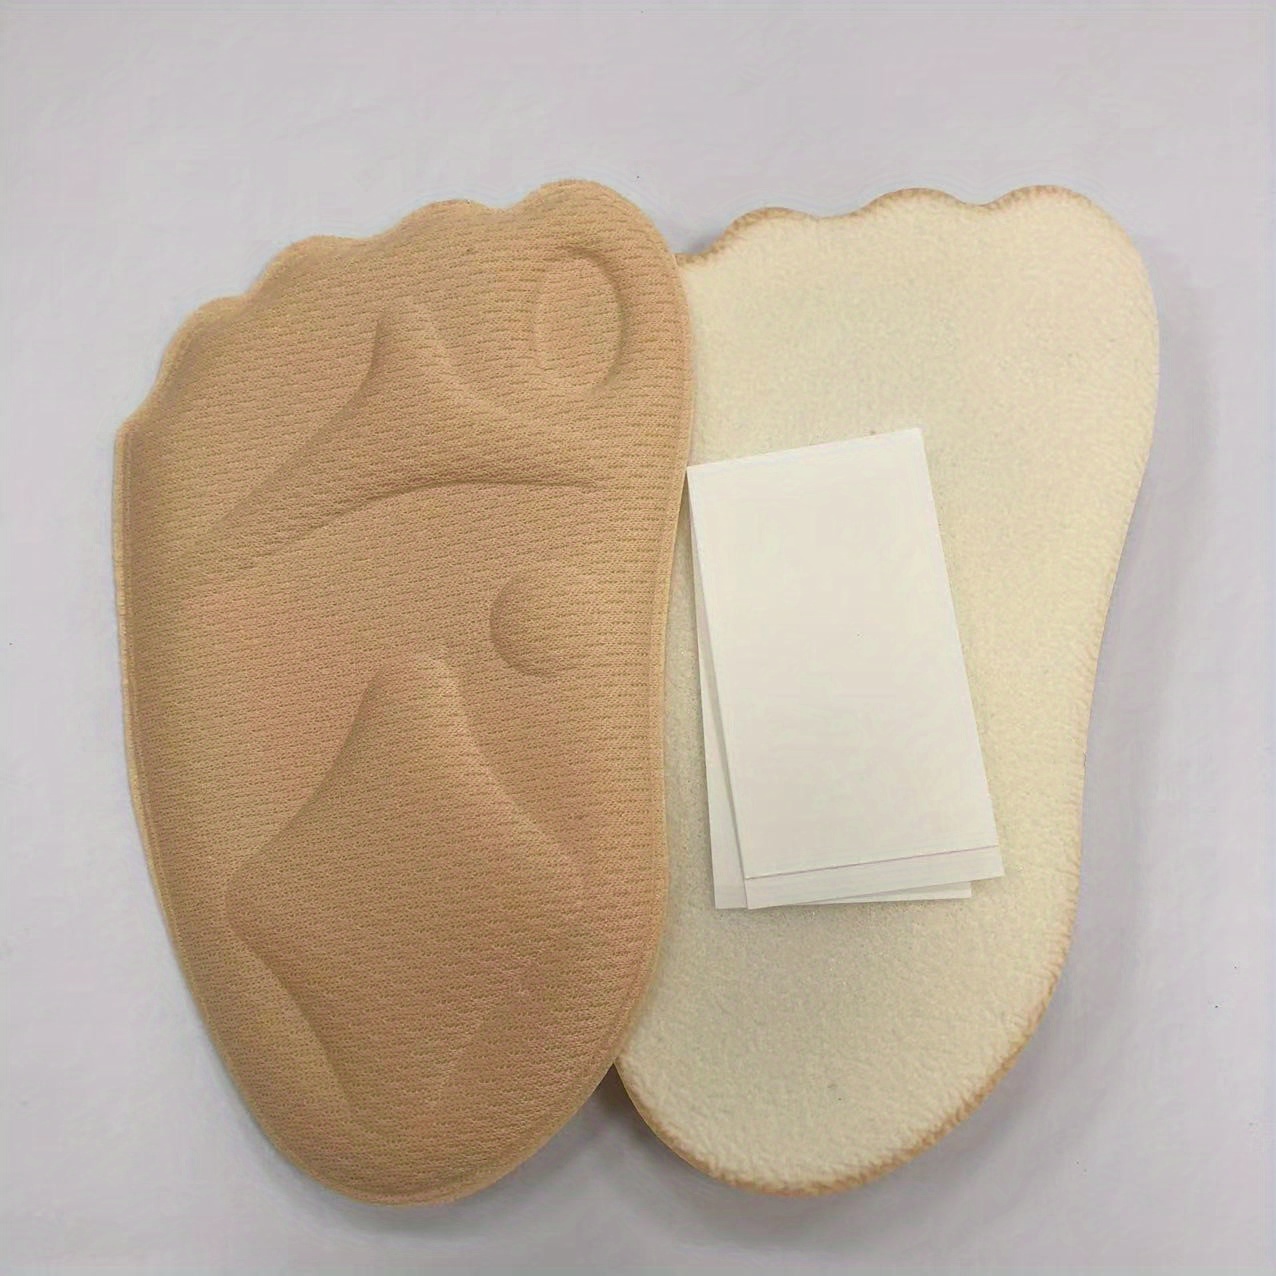 1pair Forefoot Half Insoles For Shoes Shoe Size Reduce Insert Shoe Pads ...